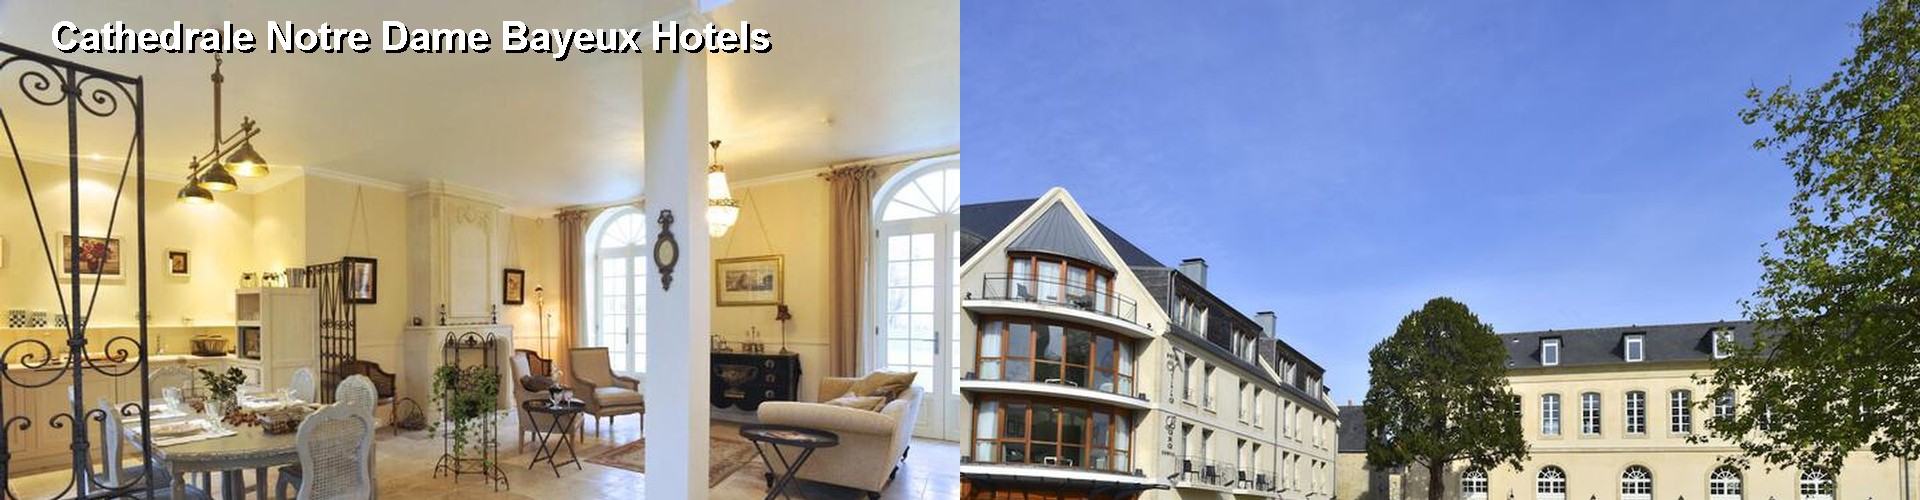 5 Best Hotels near Cathedrale Notre Dame Bayeux